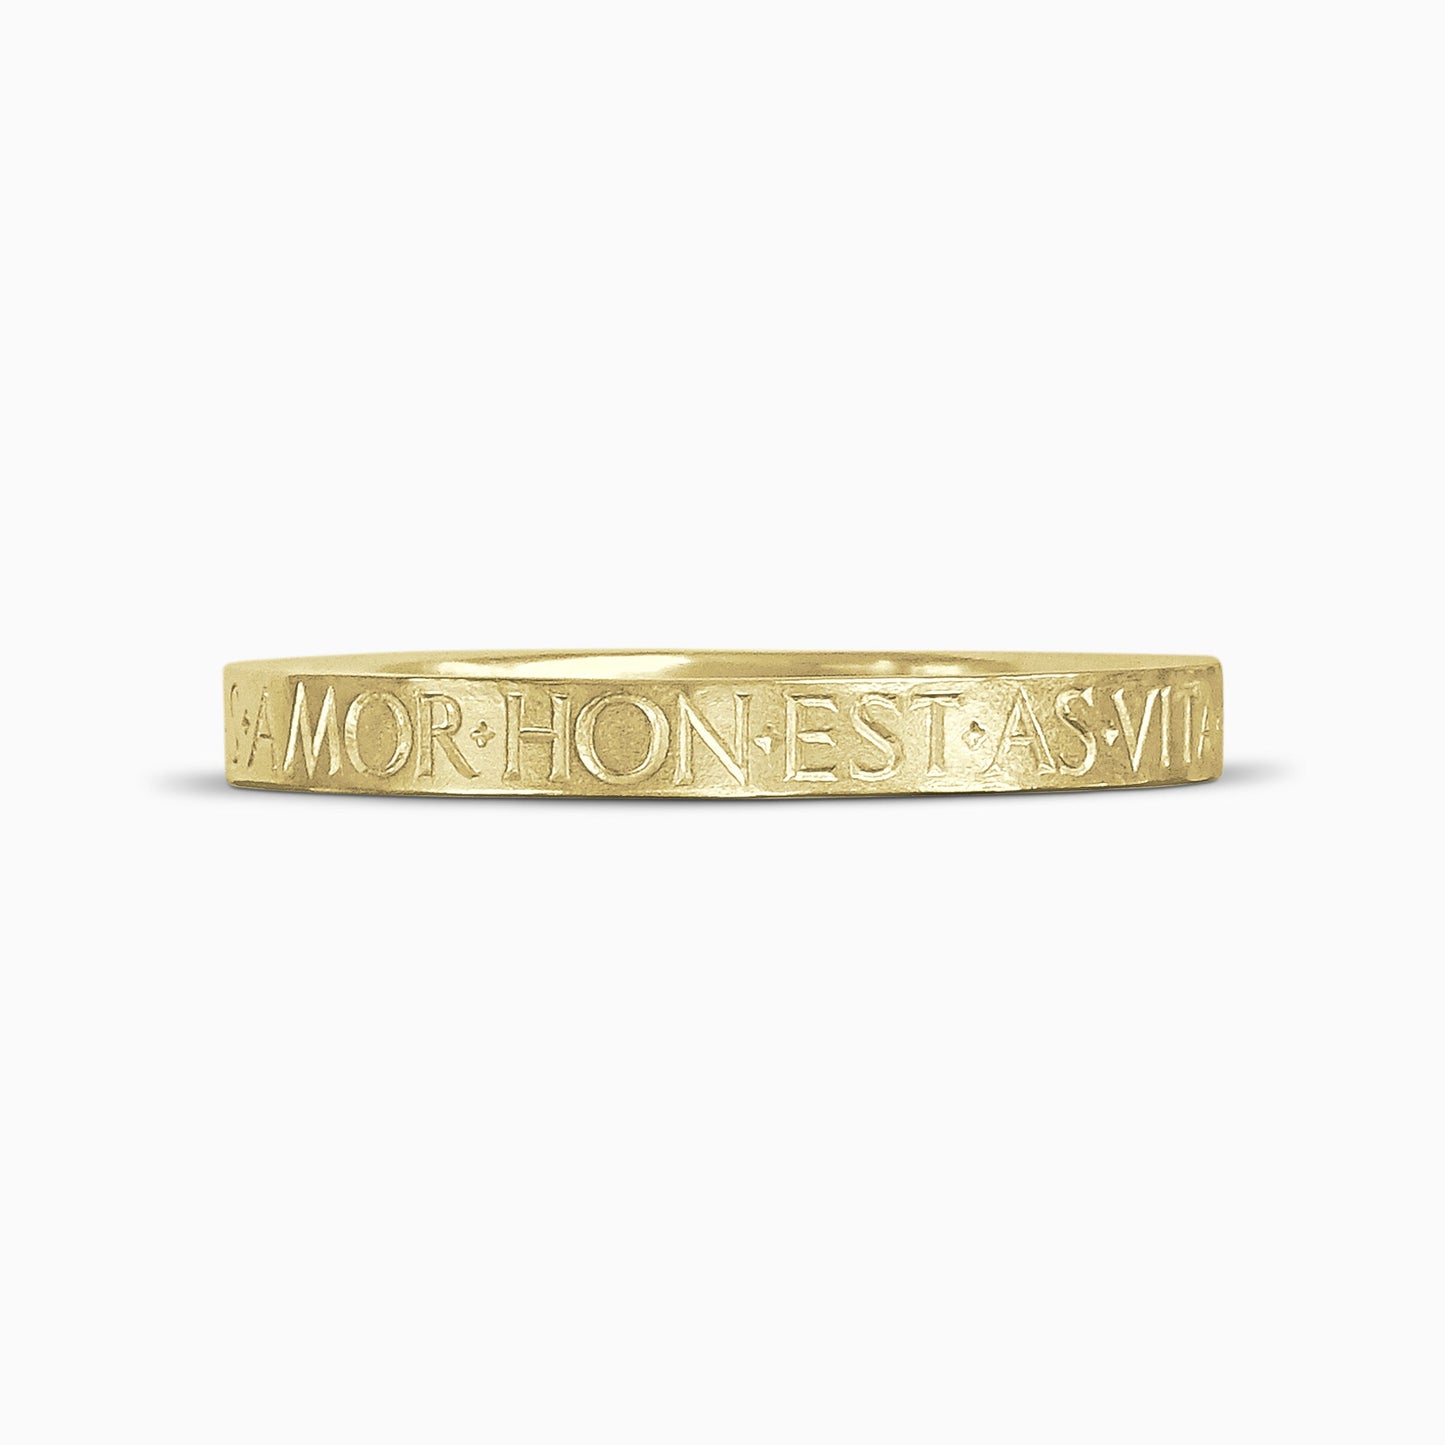 An 18ct Fairtrade yellow gold bangle with Love, Honour, Courage, Hope, Peace,Truth and Life deeply engraved in Roman capitals around the outside. Width 8mm. Inside diameter 64mm. 